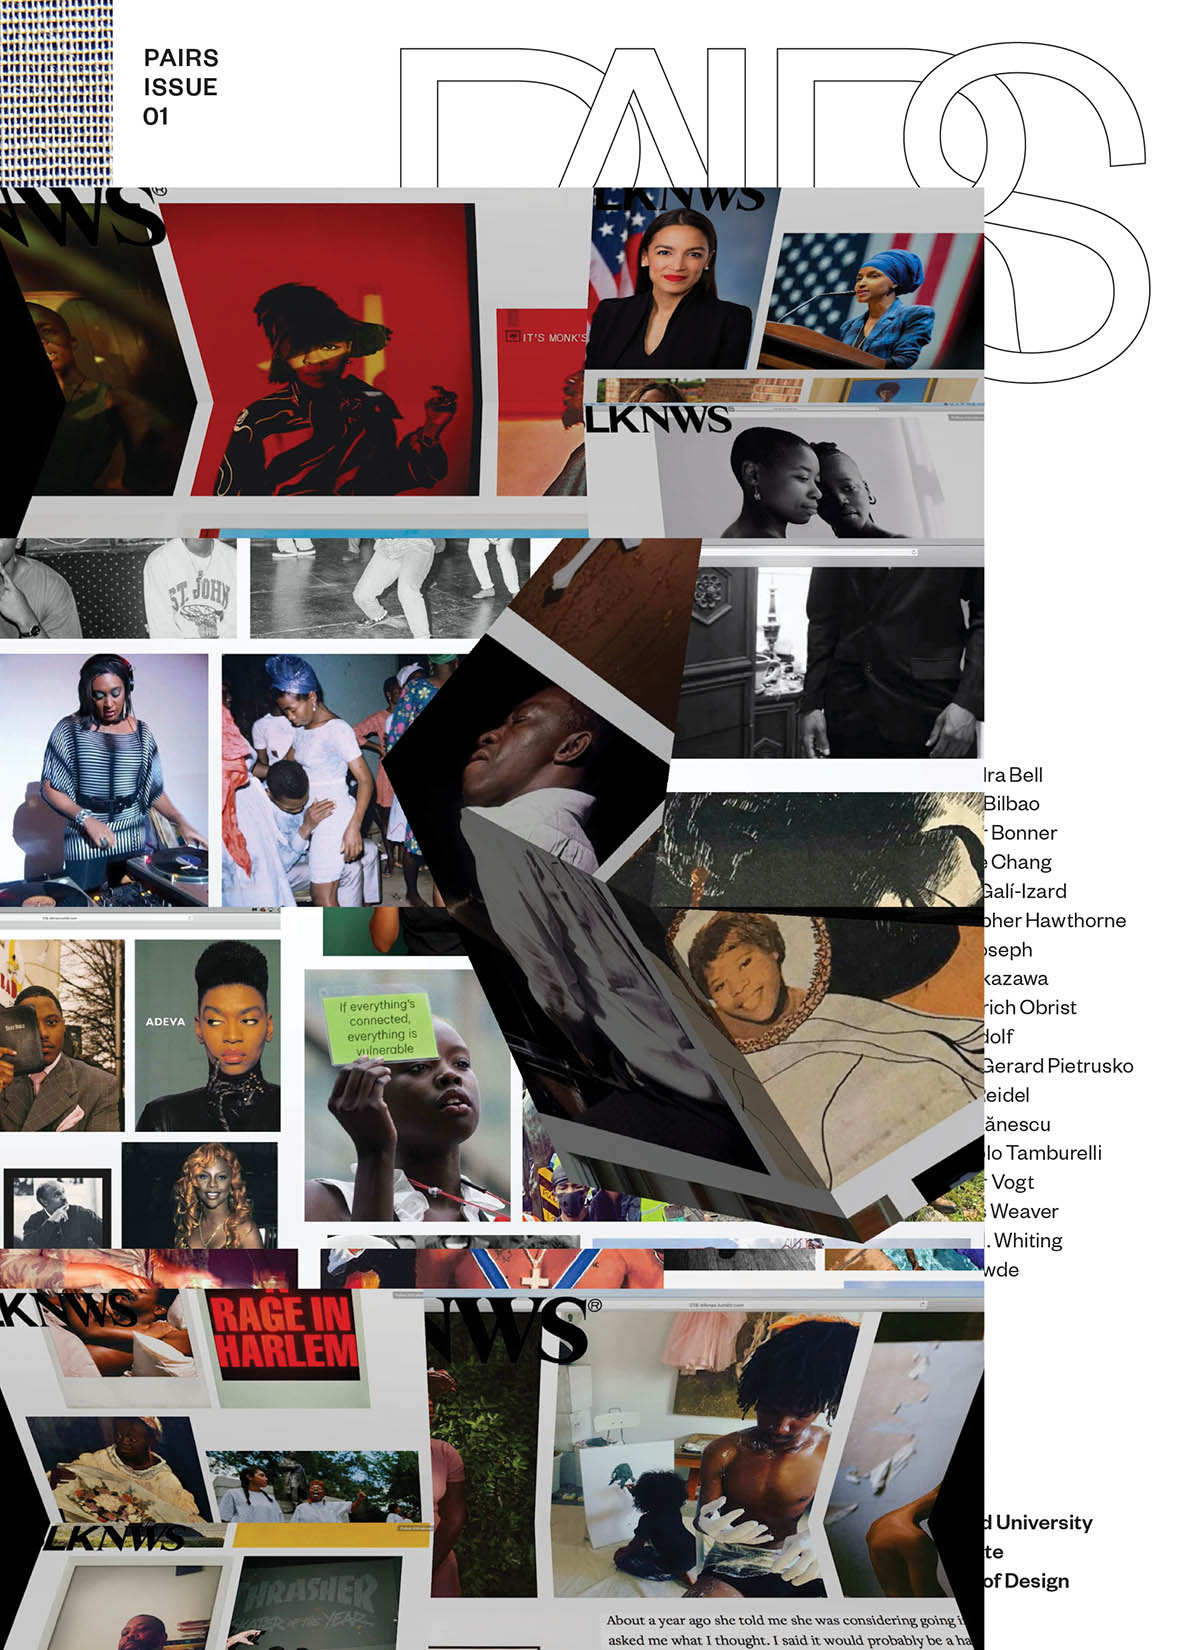 Cover of the Pairs 01 publication, showing a collage of many images.